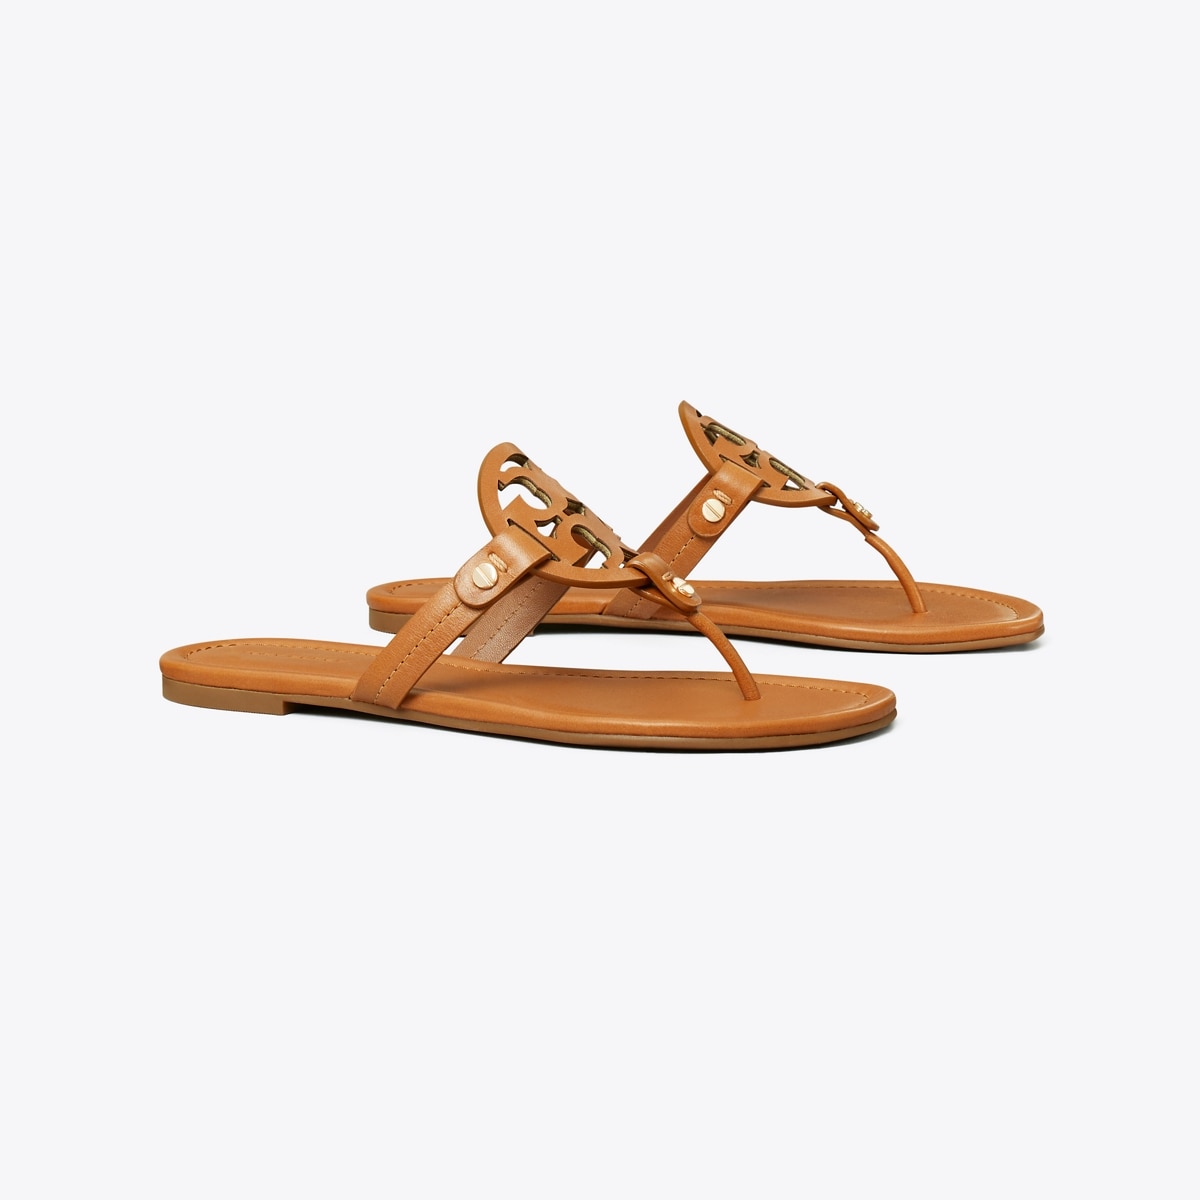 Miller Sandal, Leather: Women's Shoes | Sandals | Tory Burch UK